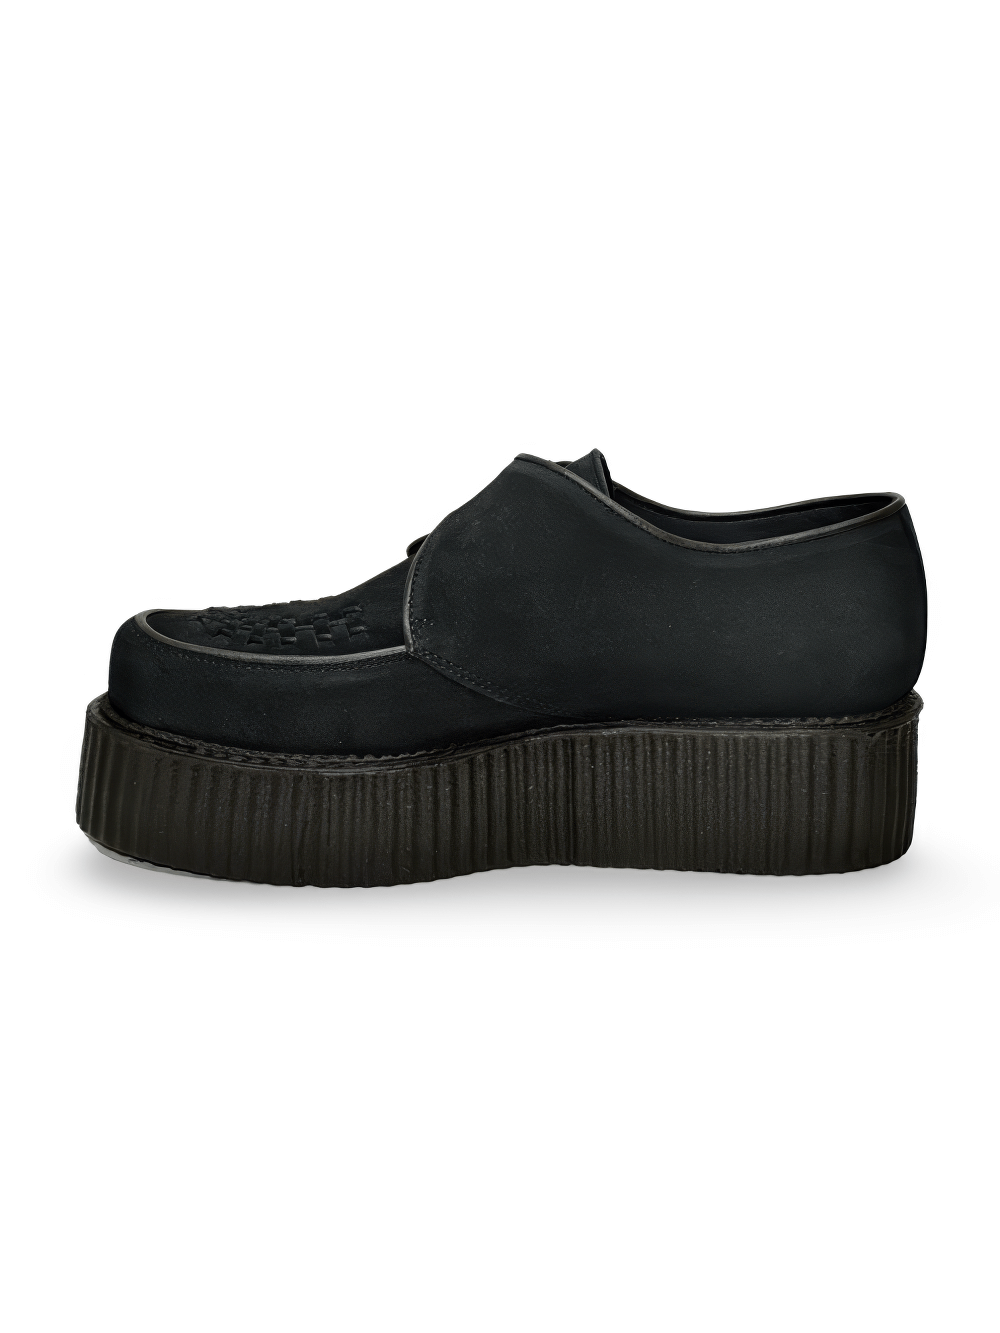 Unisex Black Suede Platform Creepers with Buckle